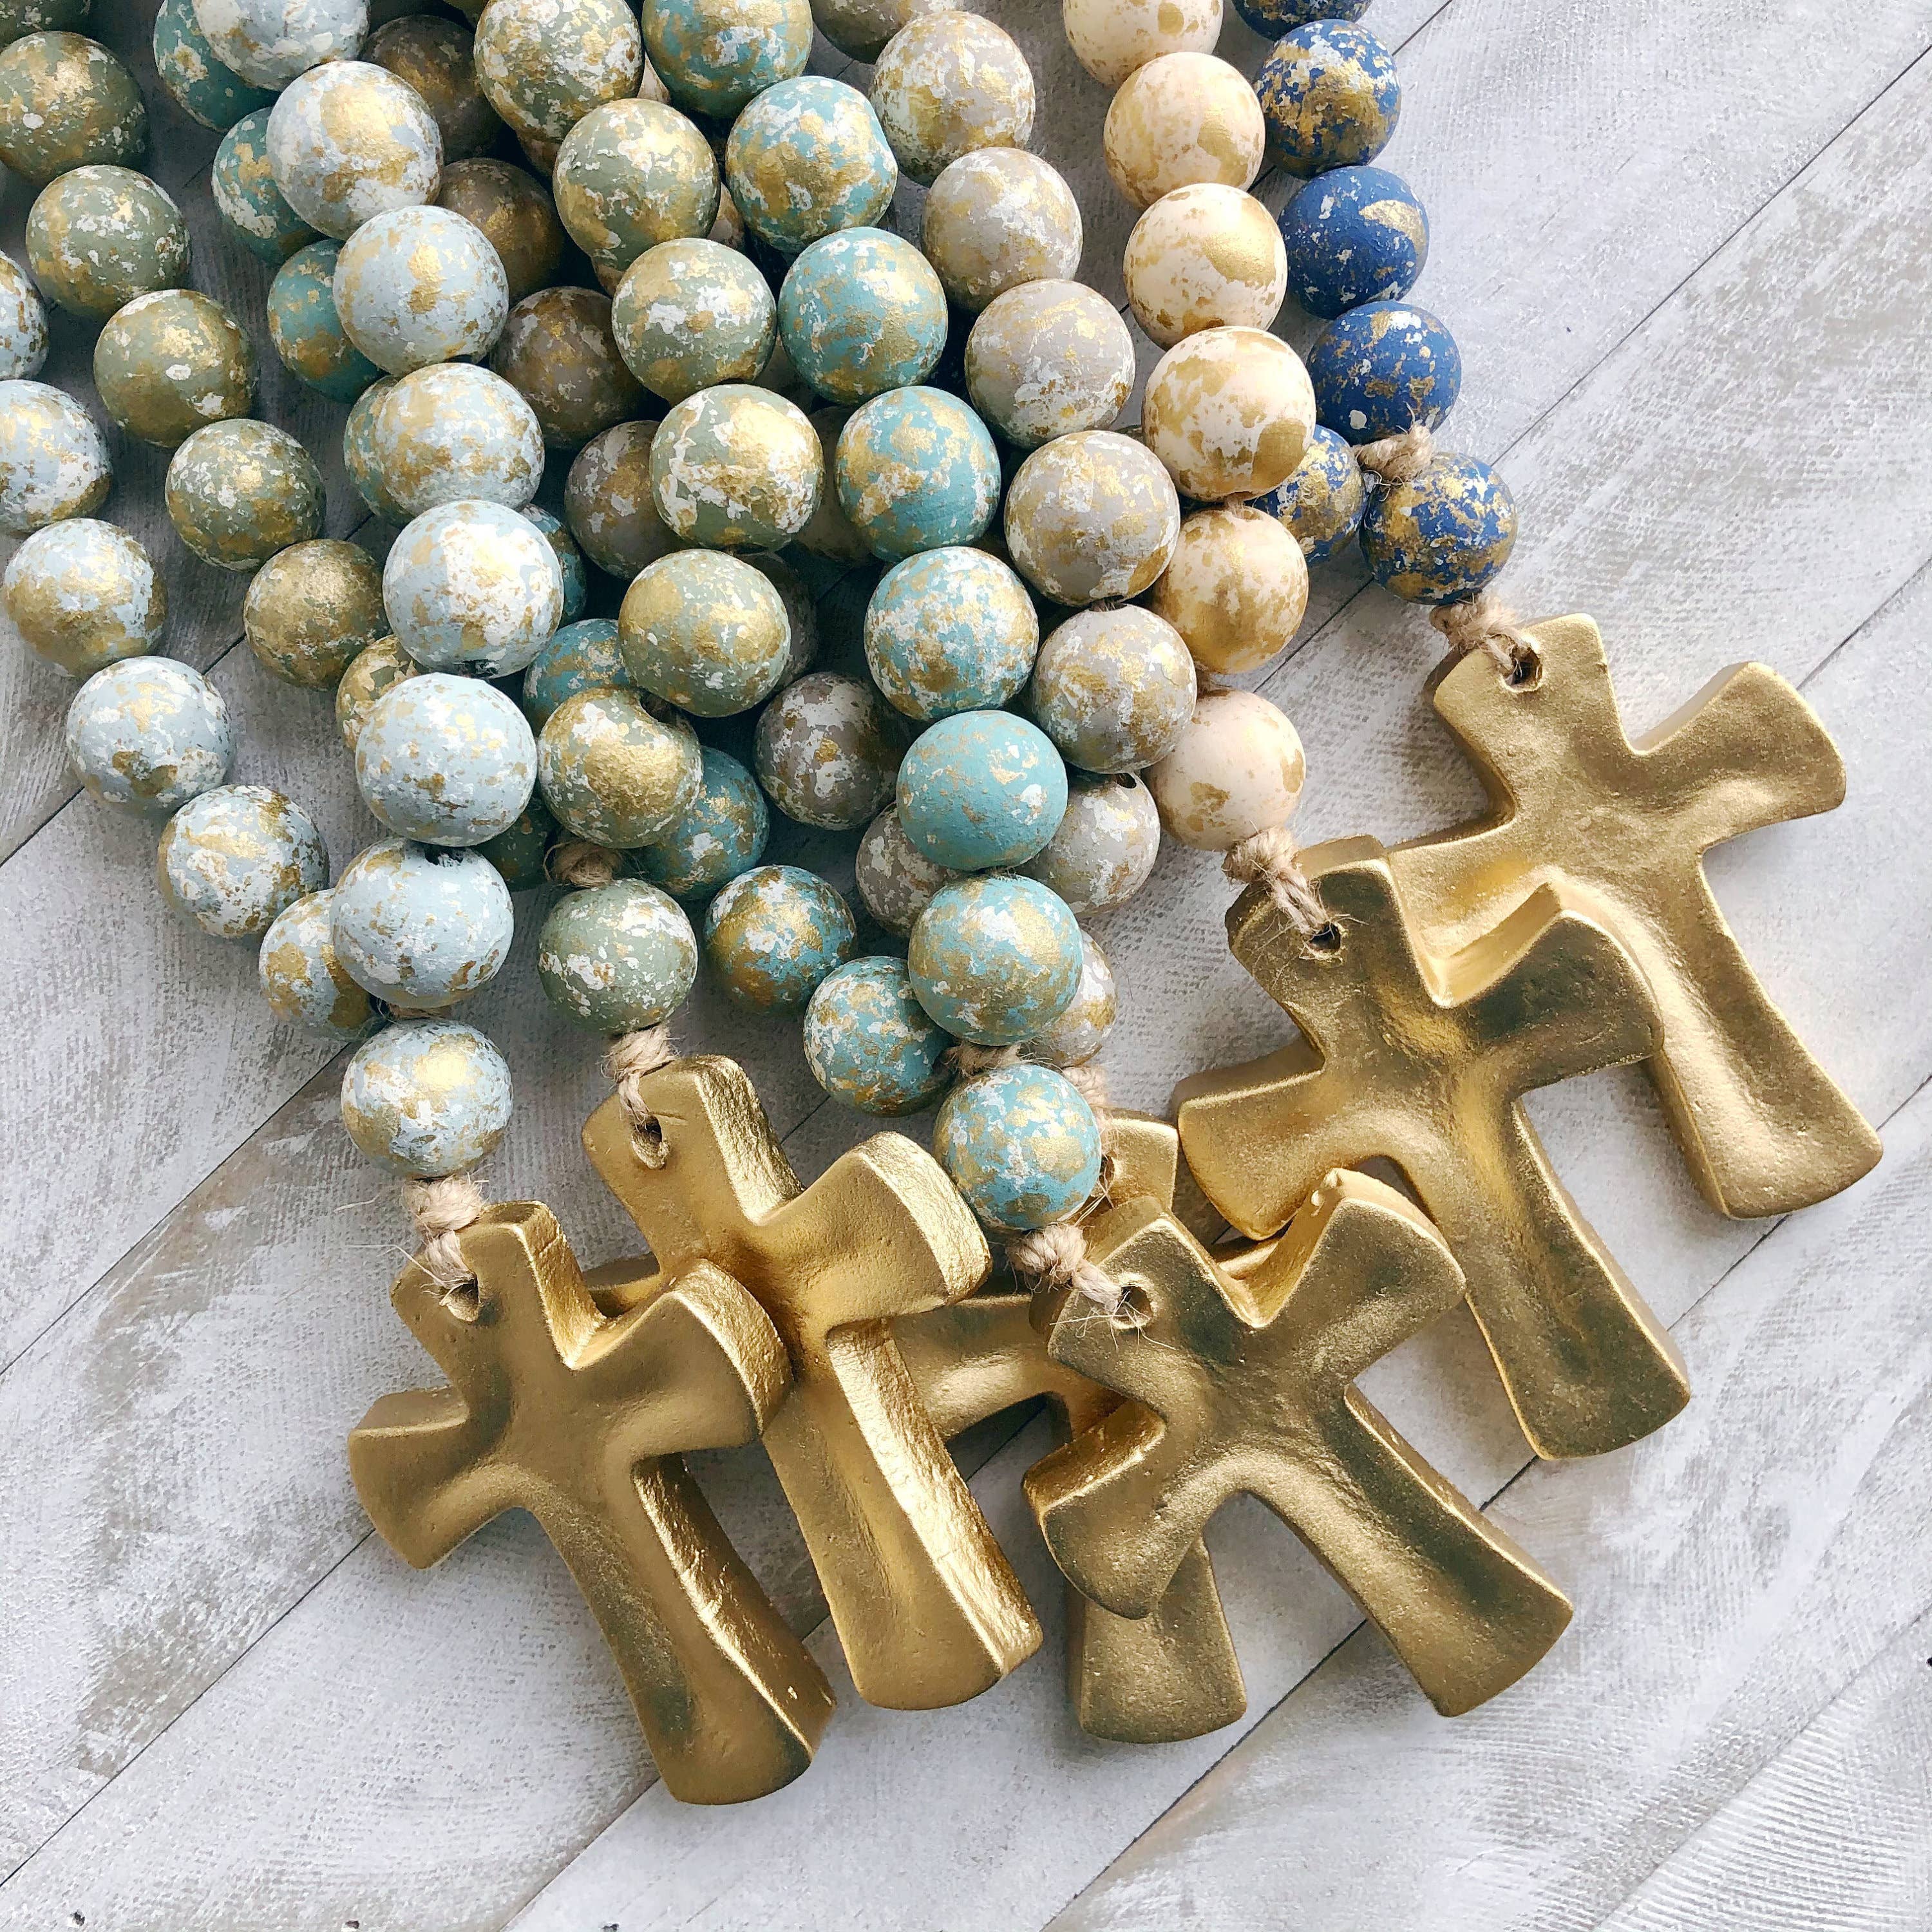 Blessing beads are a unique way to remind you of God’s love and make a thoughtful all-occasion gift! Hung from doorknobs or drawer pulls, draped from a bowl, basket or picture frame, or simply placed on a coffee or side table, blessing beads add a special decorative touch to any space in your home.